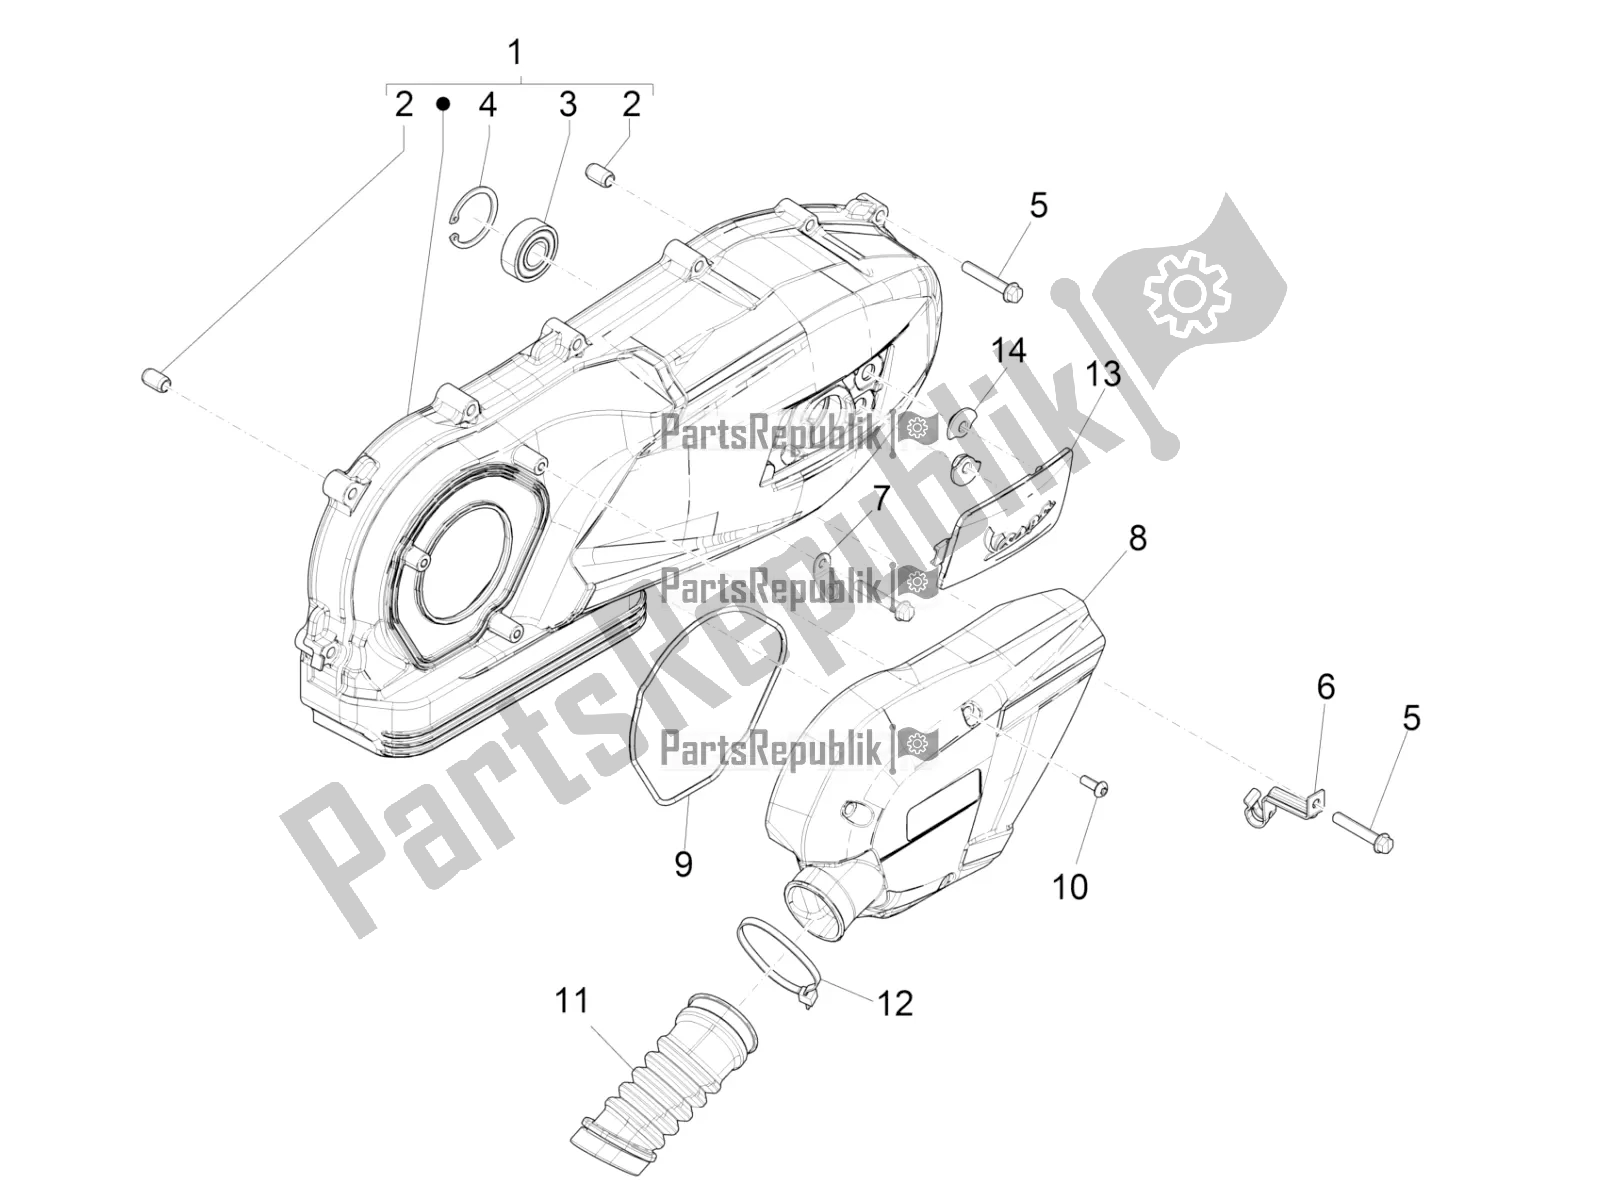 All parts for the Crankcase Cover - Crankcase Cooling of the Vespa Sprint 150 Iget ABS USA 2021